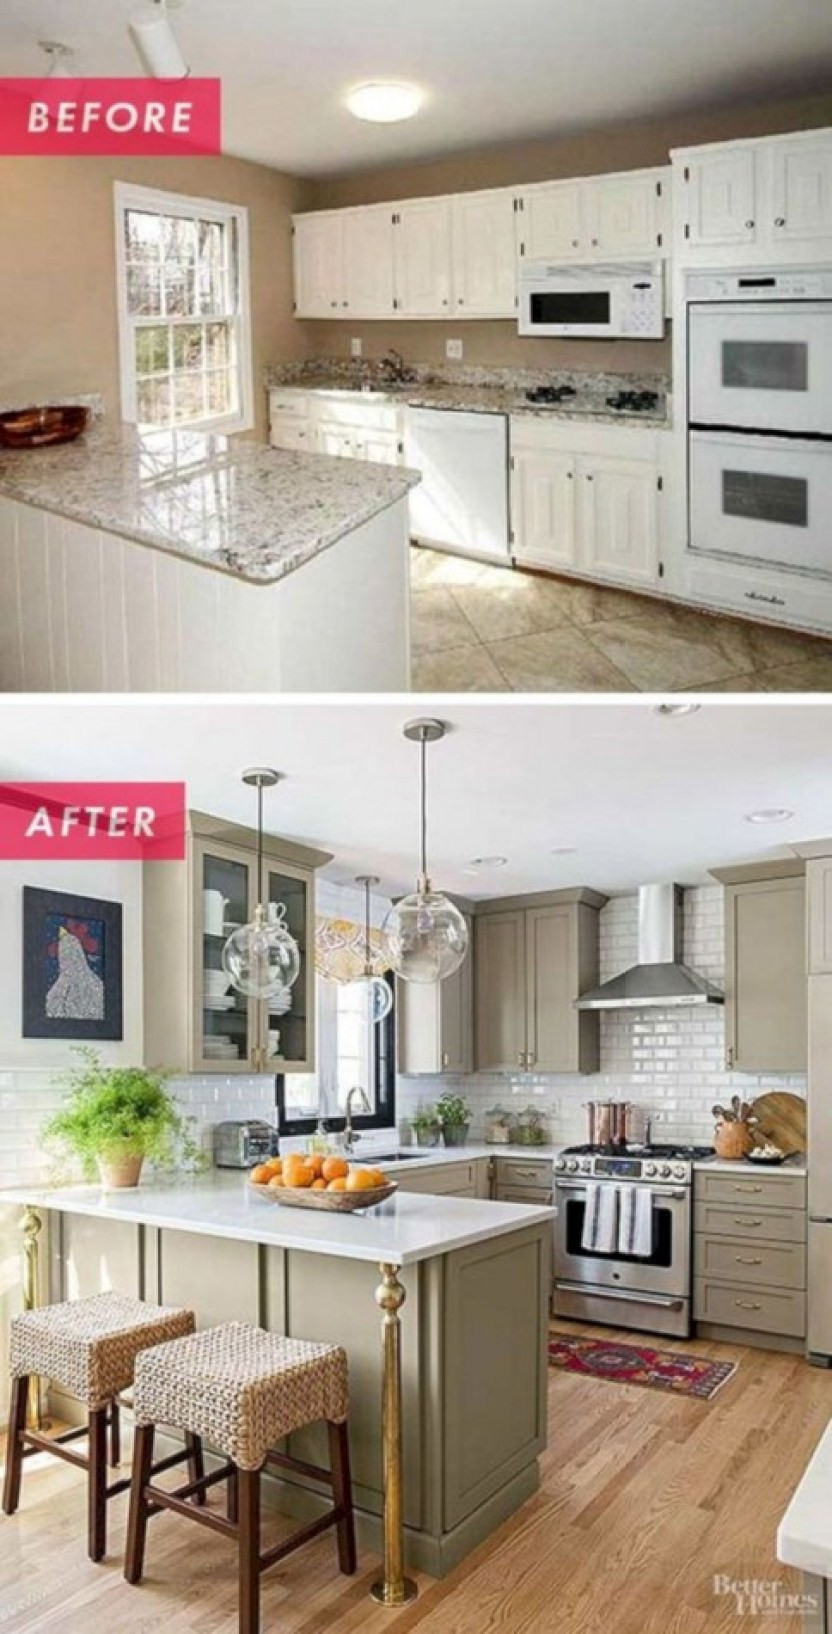 Renovation Small Kitchen
 25 Amazing Small Kitchen Remodel Ideas that Perfect for